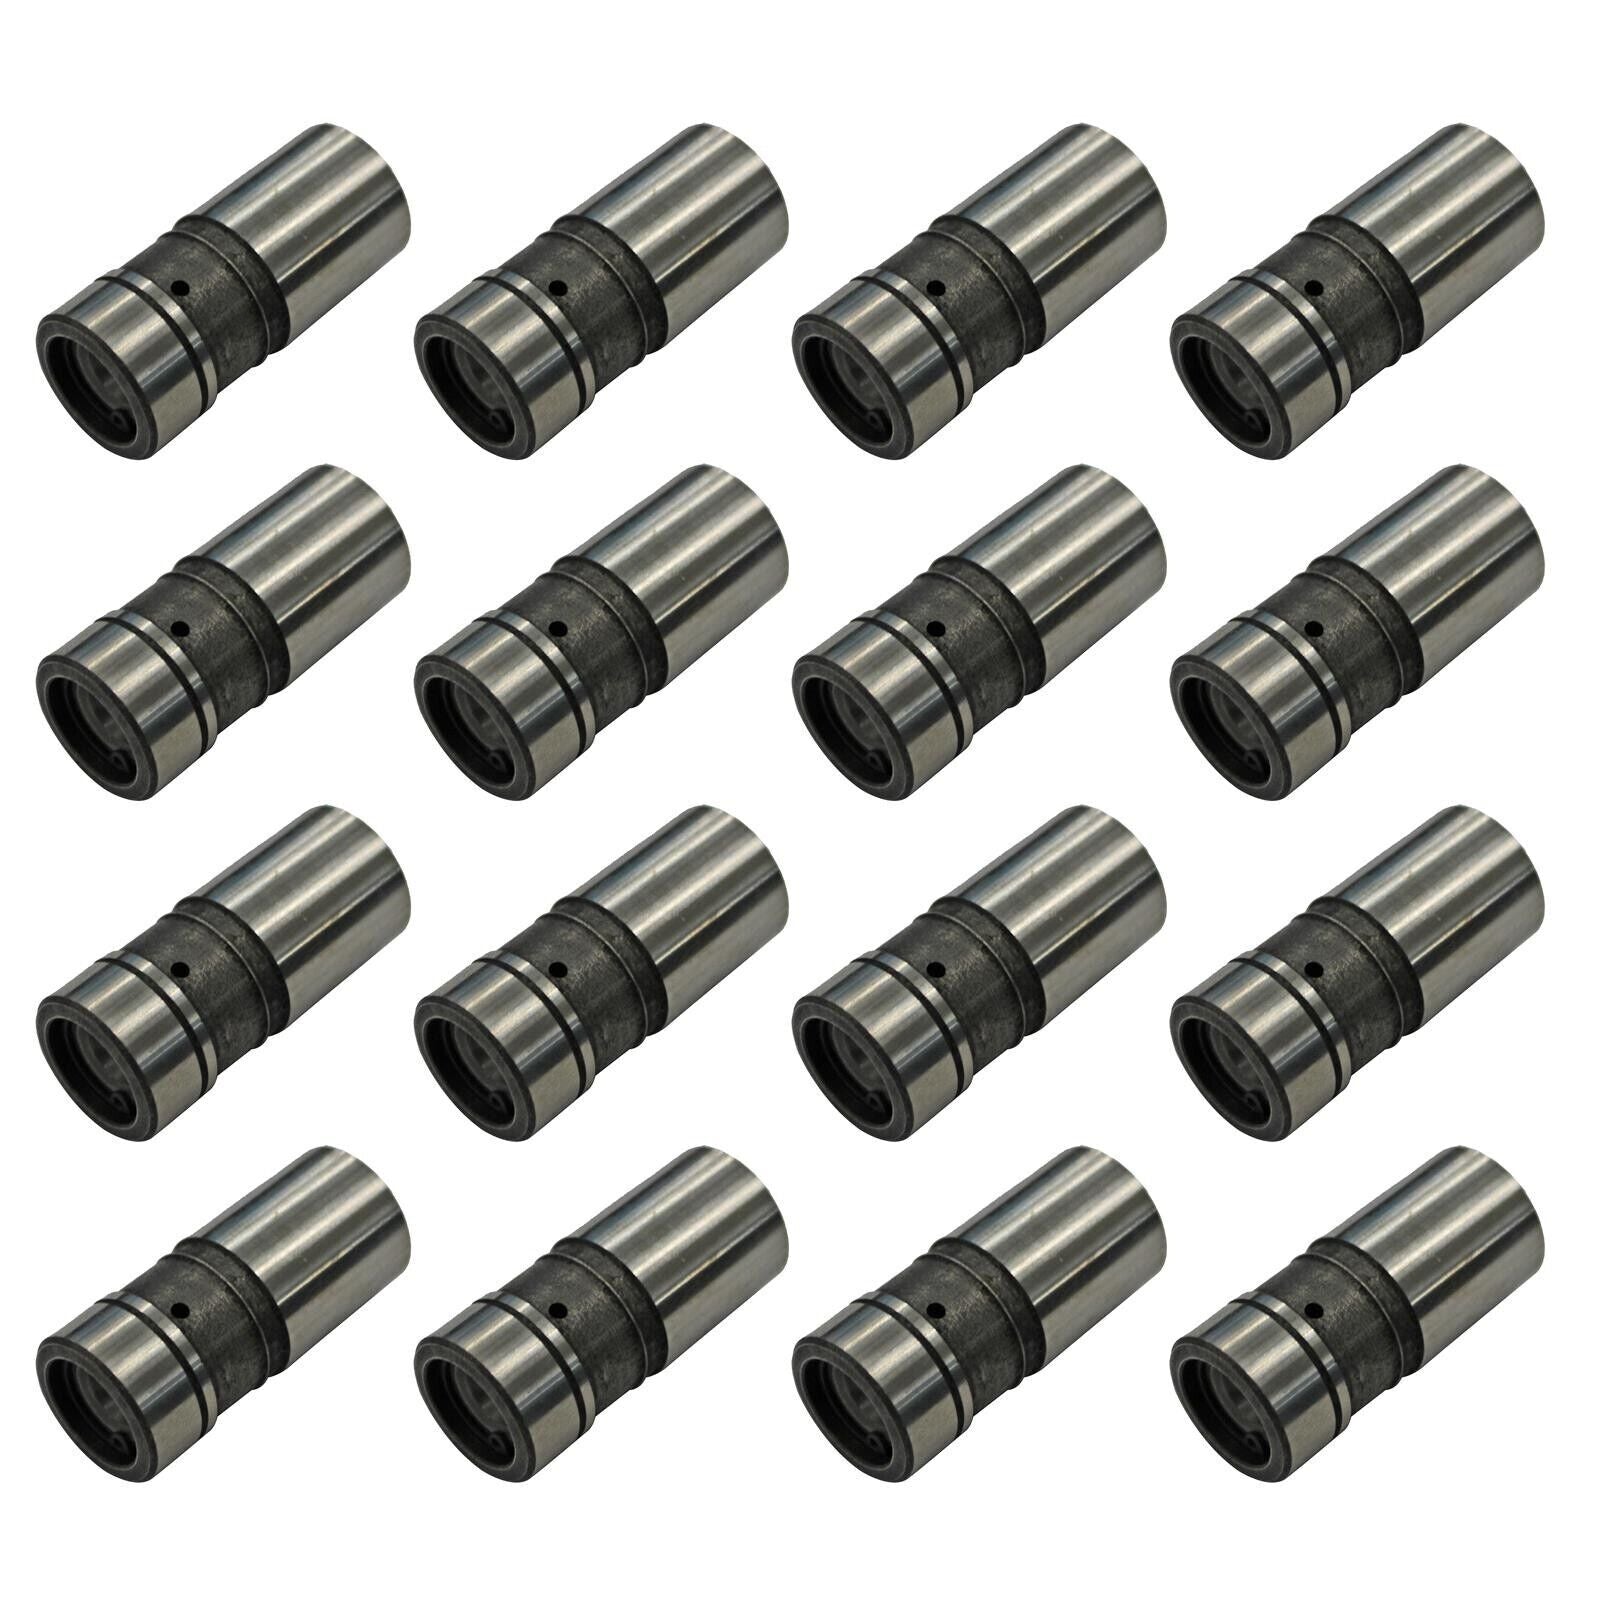 Comp Cams Race Hydraulic Lifters 0.875 in. o.d., Ford pck 16 # CC84035-16